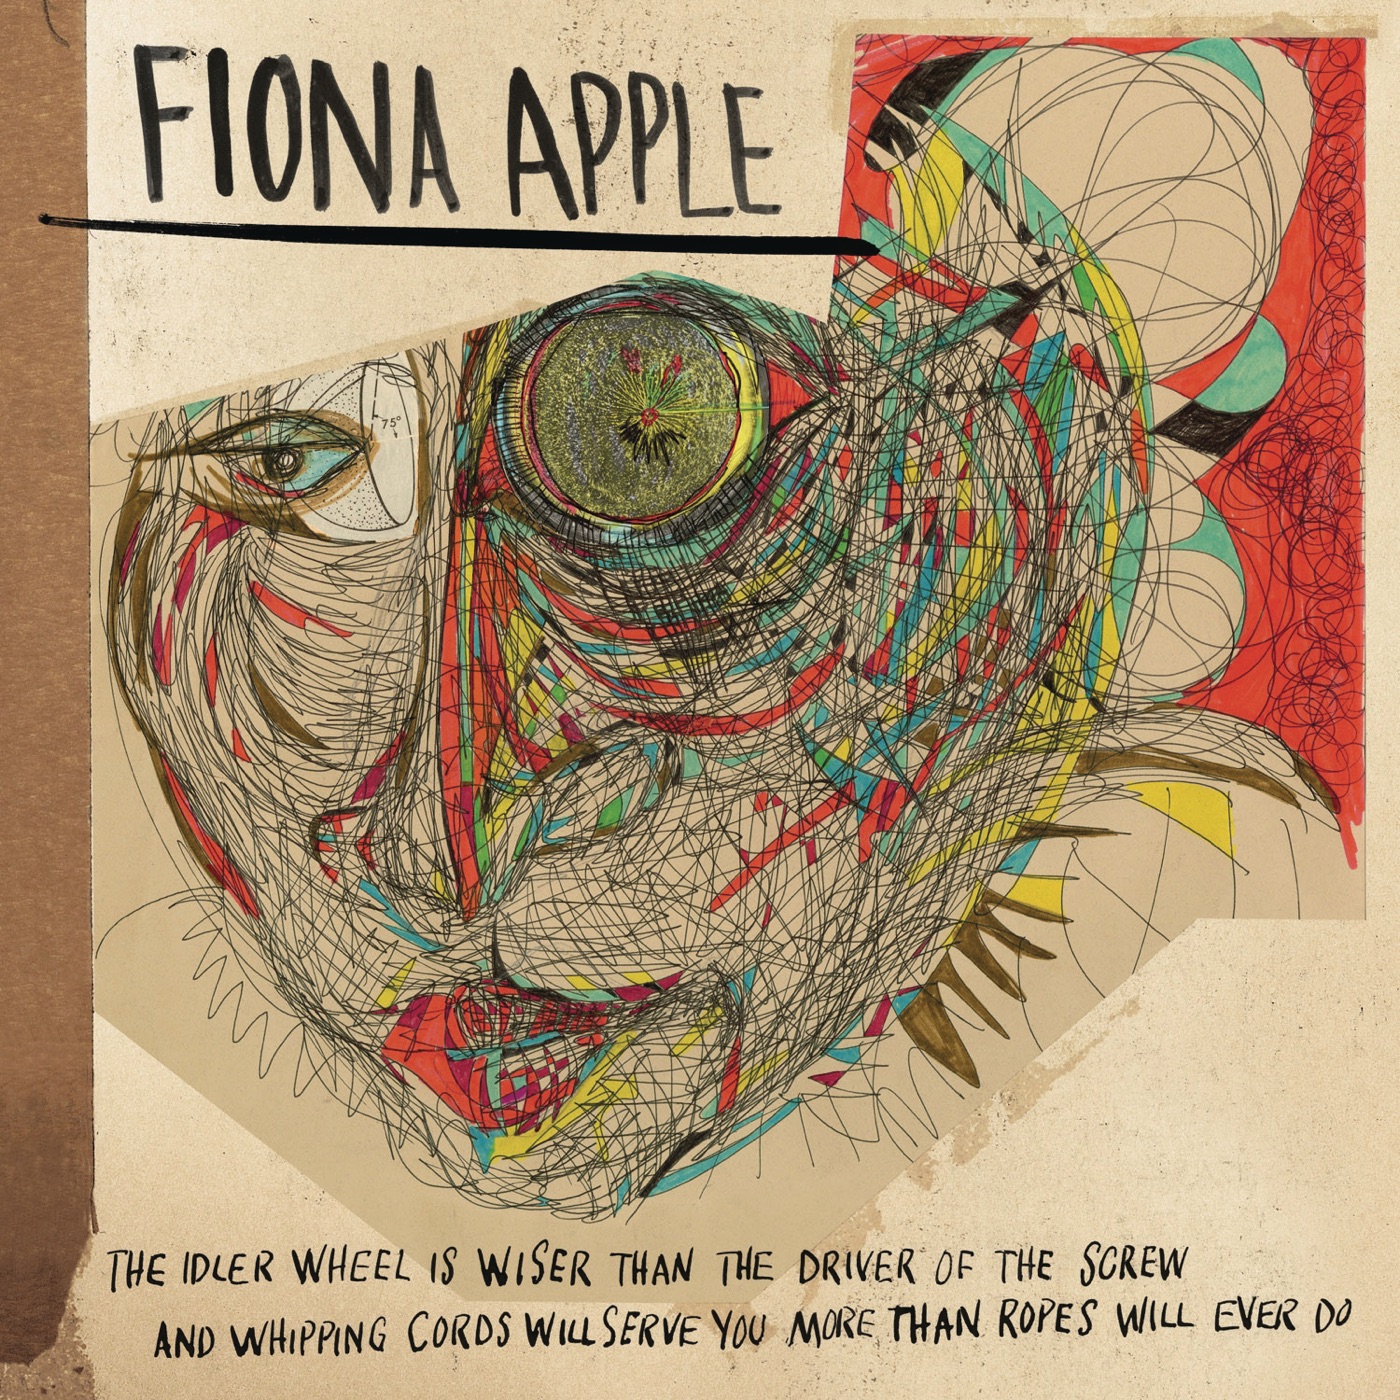 The Idler Wheel Is Wiser Than the Driver of the Screw and Whipping Cords Will Serve You More Than Ropes Will Ever Do by Fiona Apple